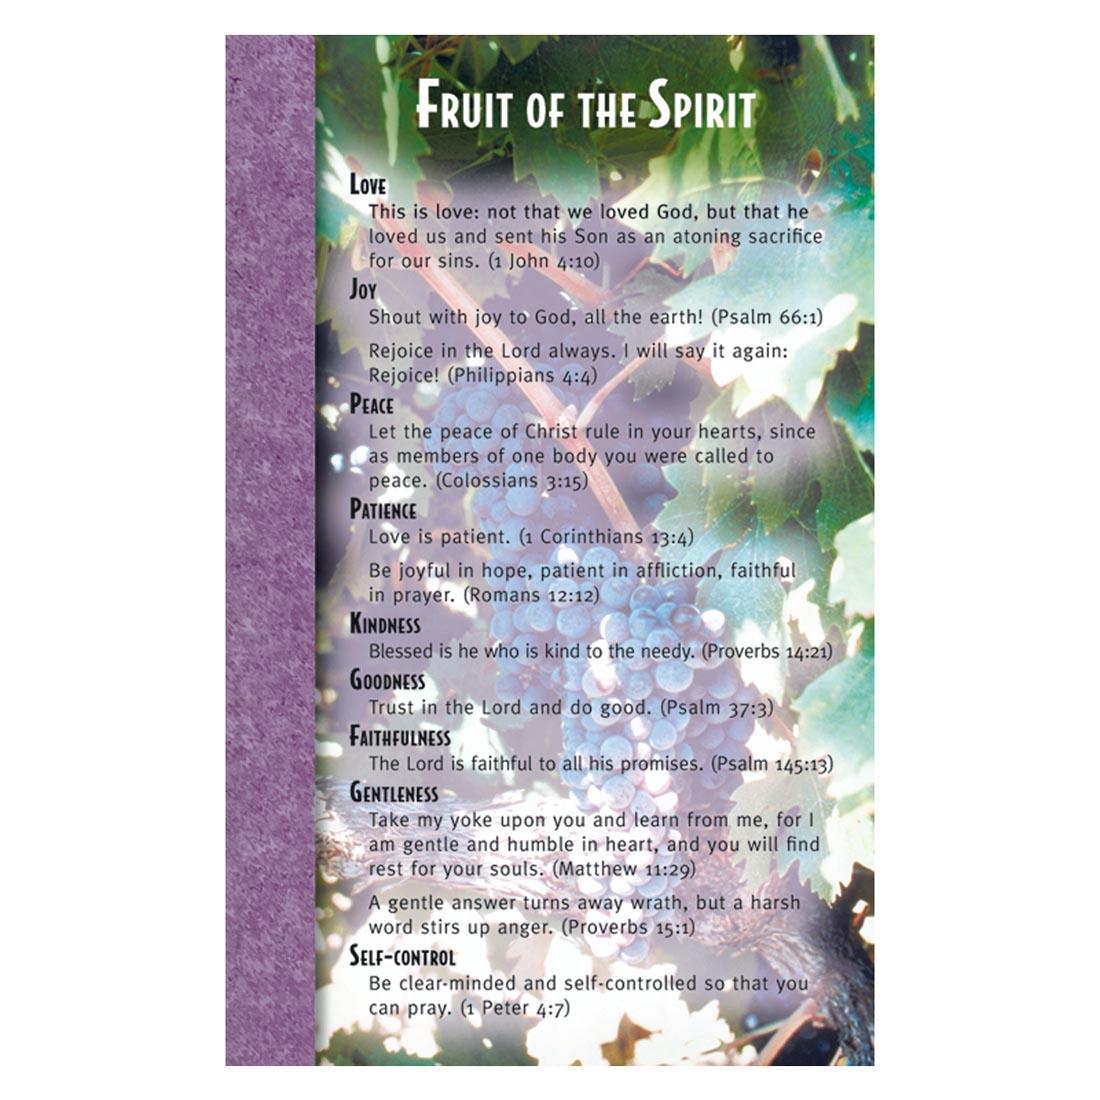 Fruit Of The Spirit Memory Card with related verses